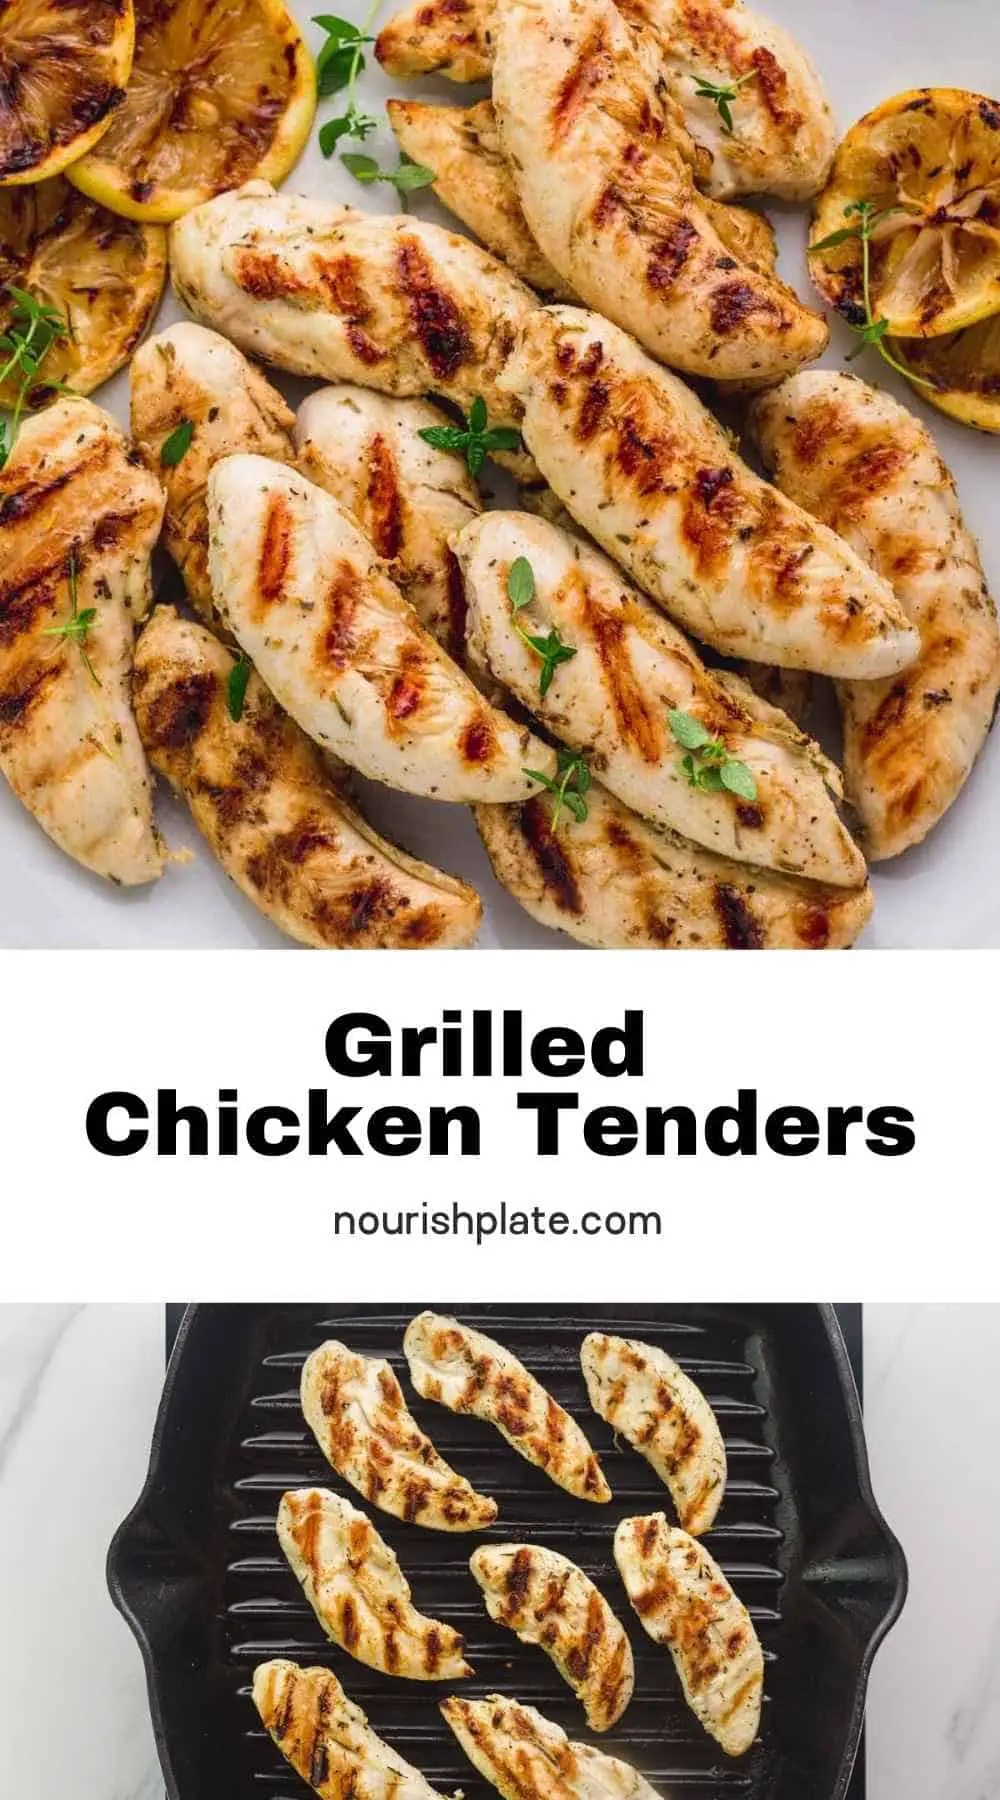 How Long to Cook Chicken Tenders on Grill